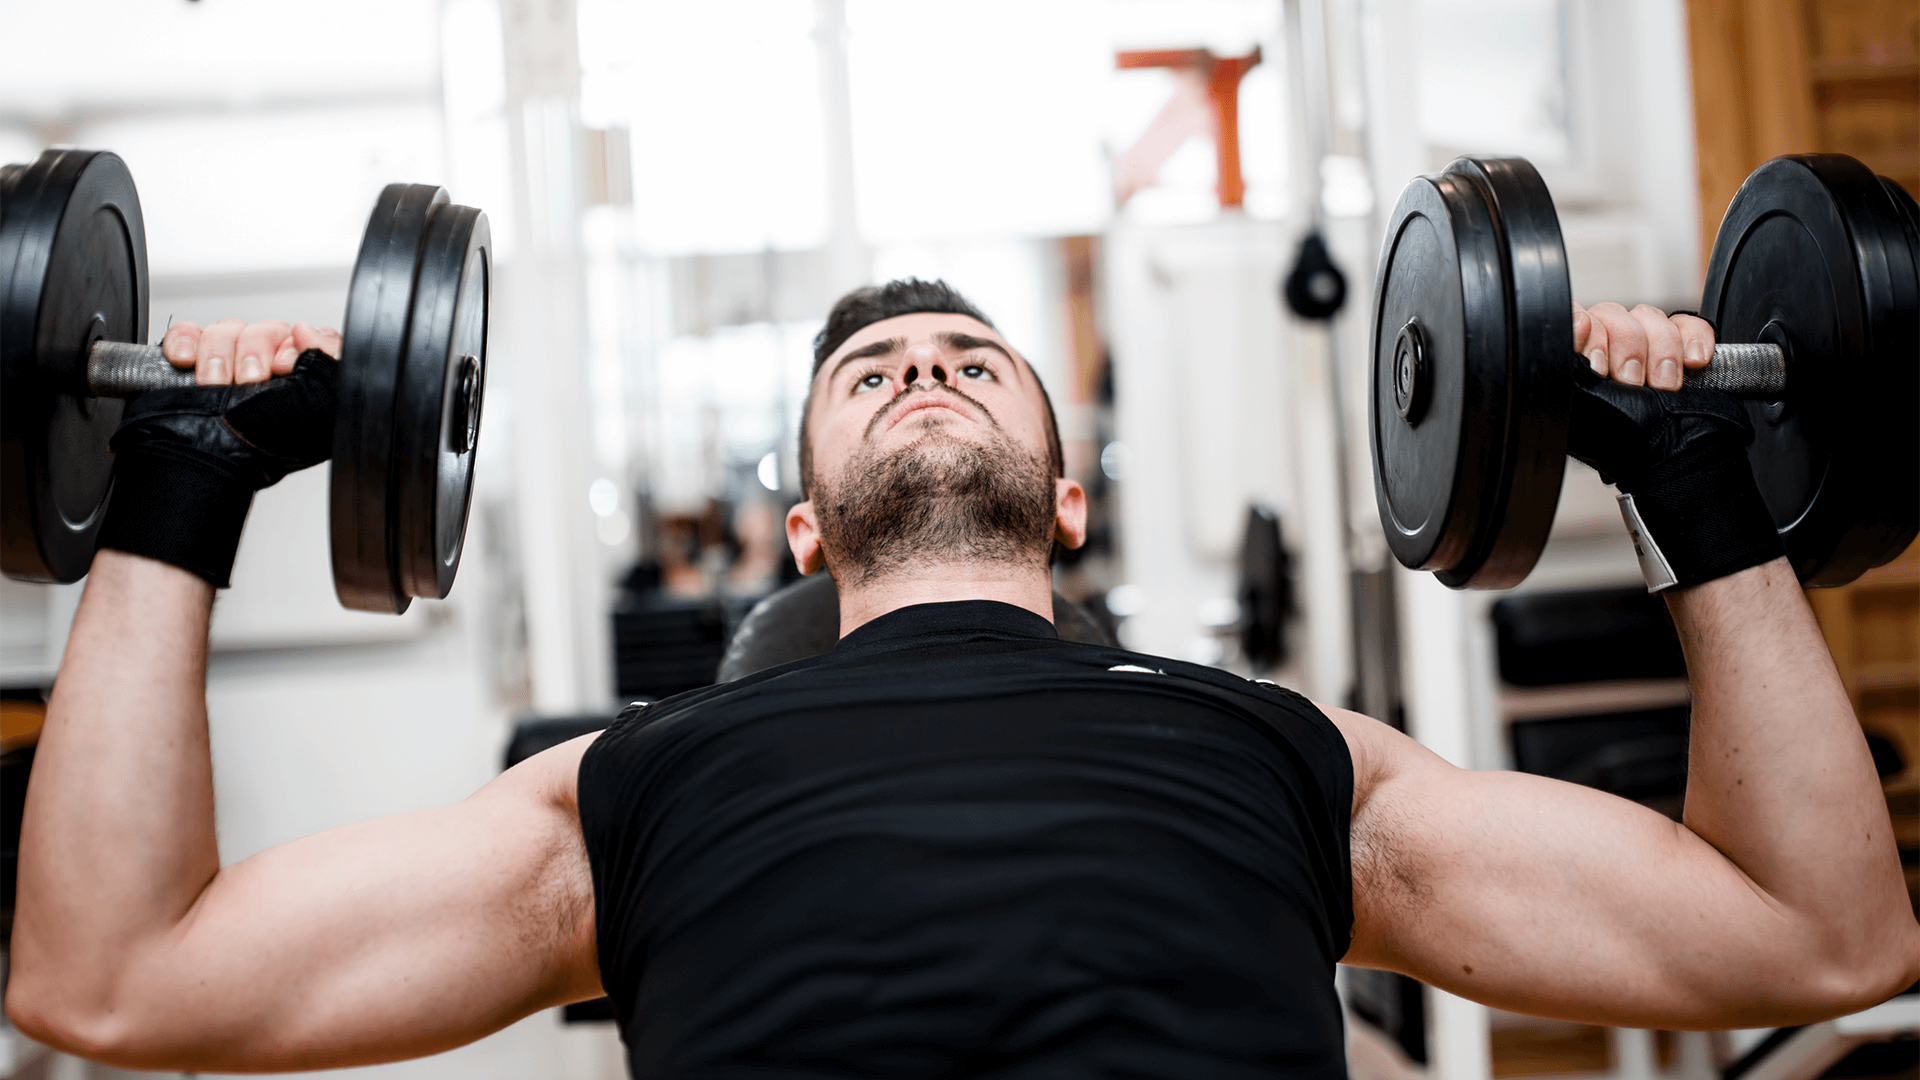 Crush Your Gym Anxiety and Build Confidence Like a Pro - 2POOD